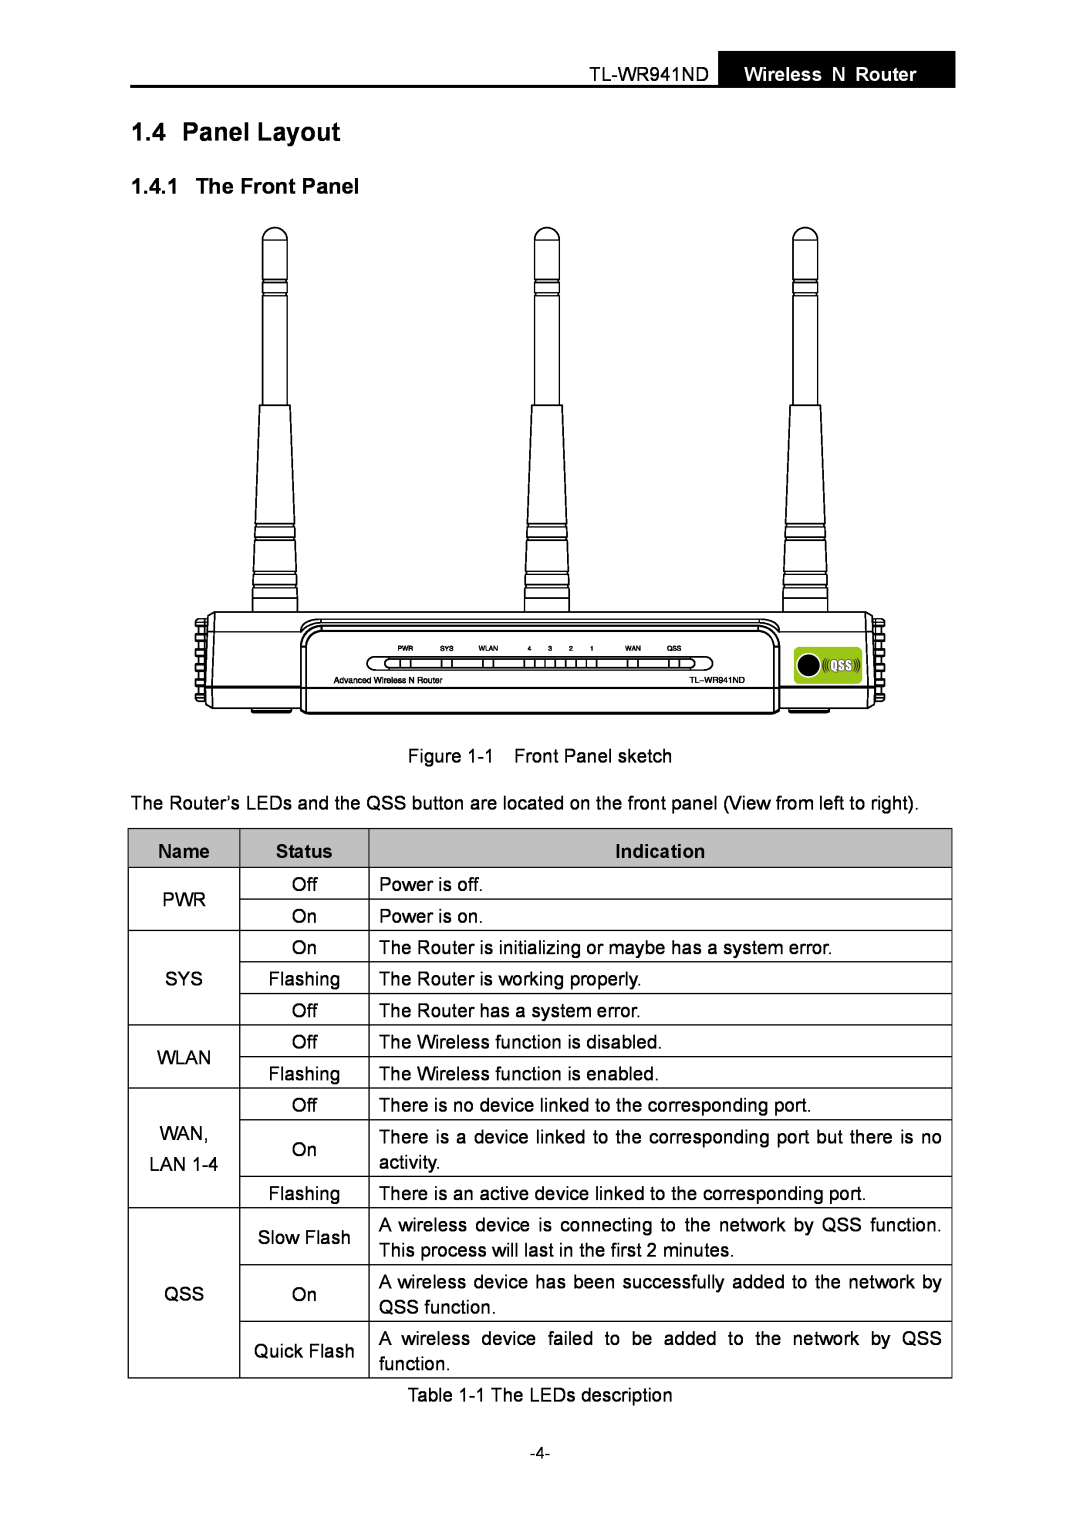 TP-Link manual Panel Layout, The Front Panel, Name, Status, Indication, TL-WR941ND Wireless N Router 